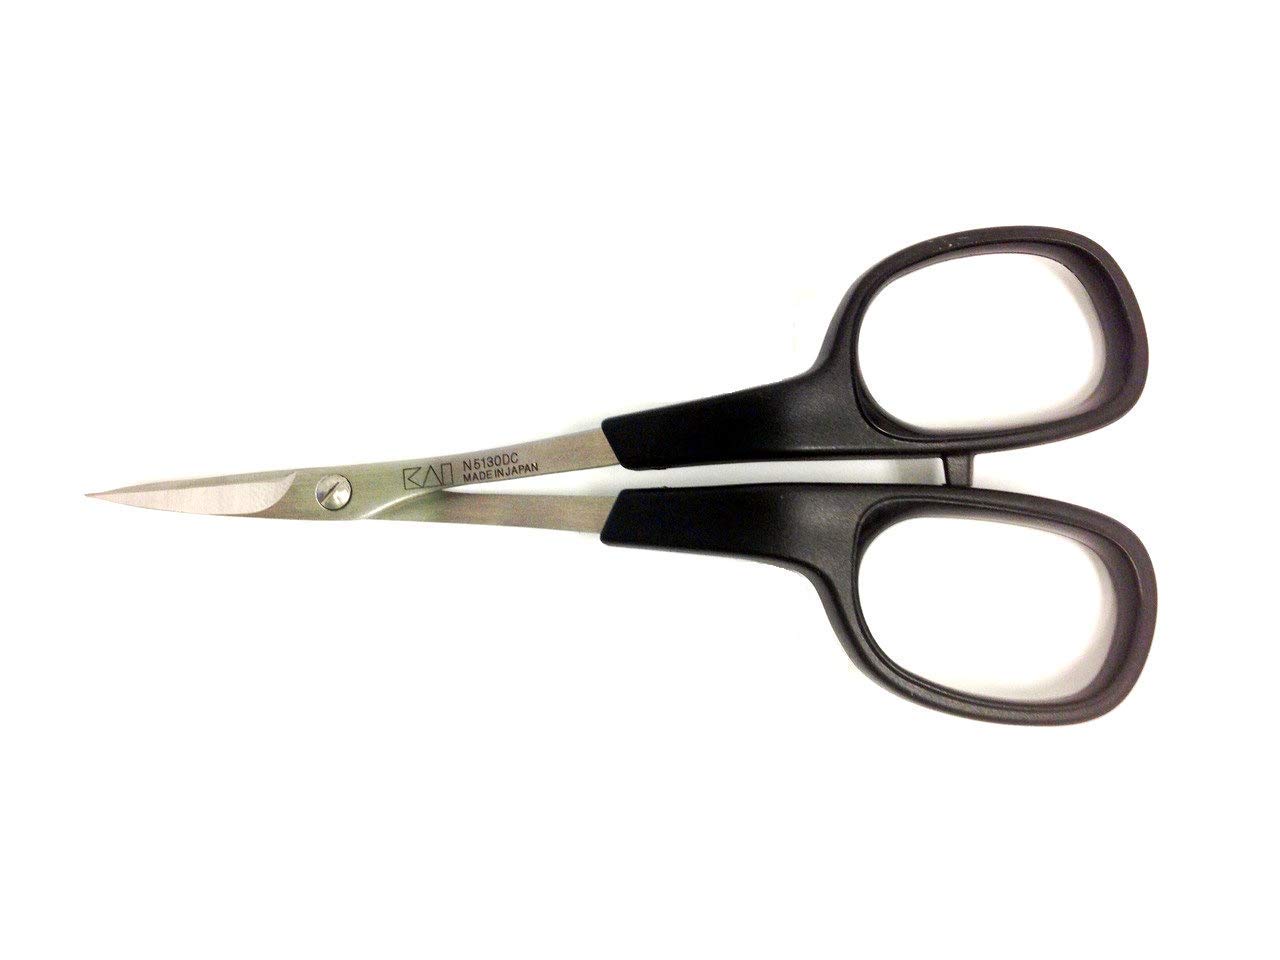 Kai Scissors 5130 5in double curved